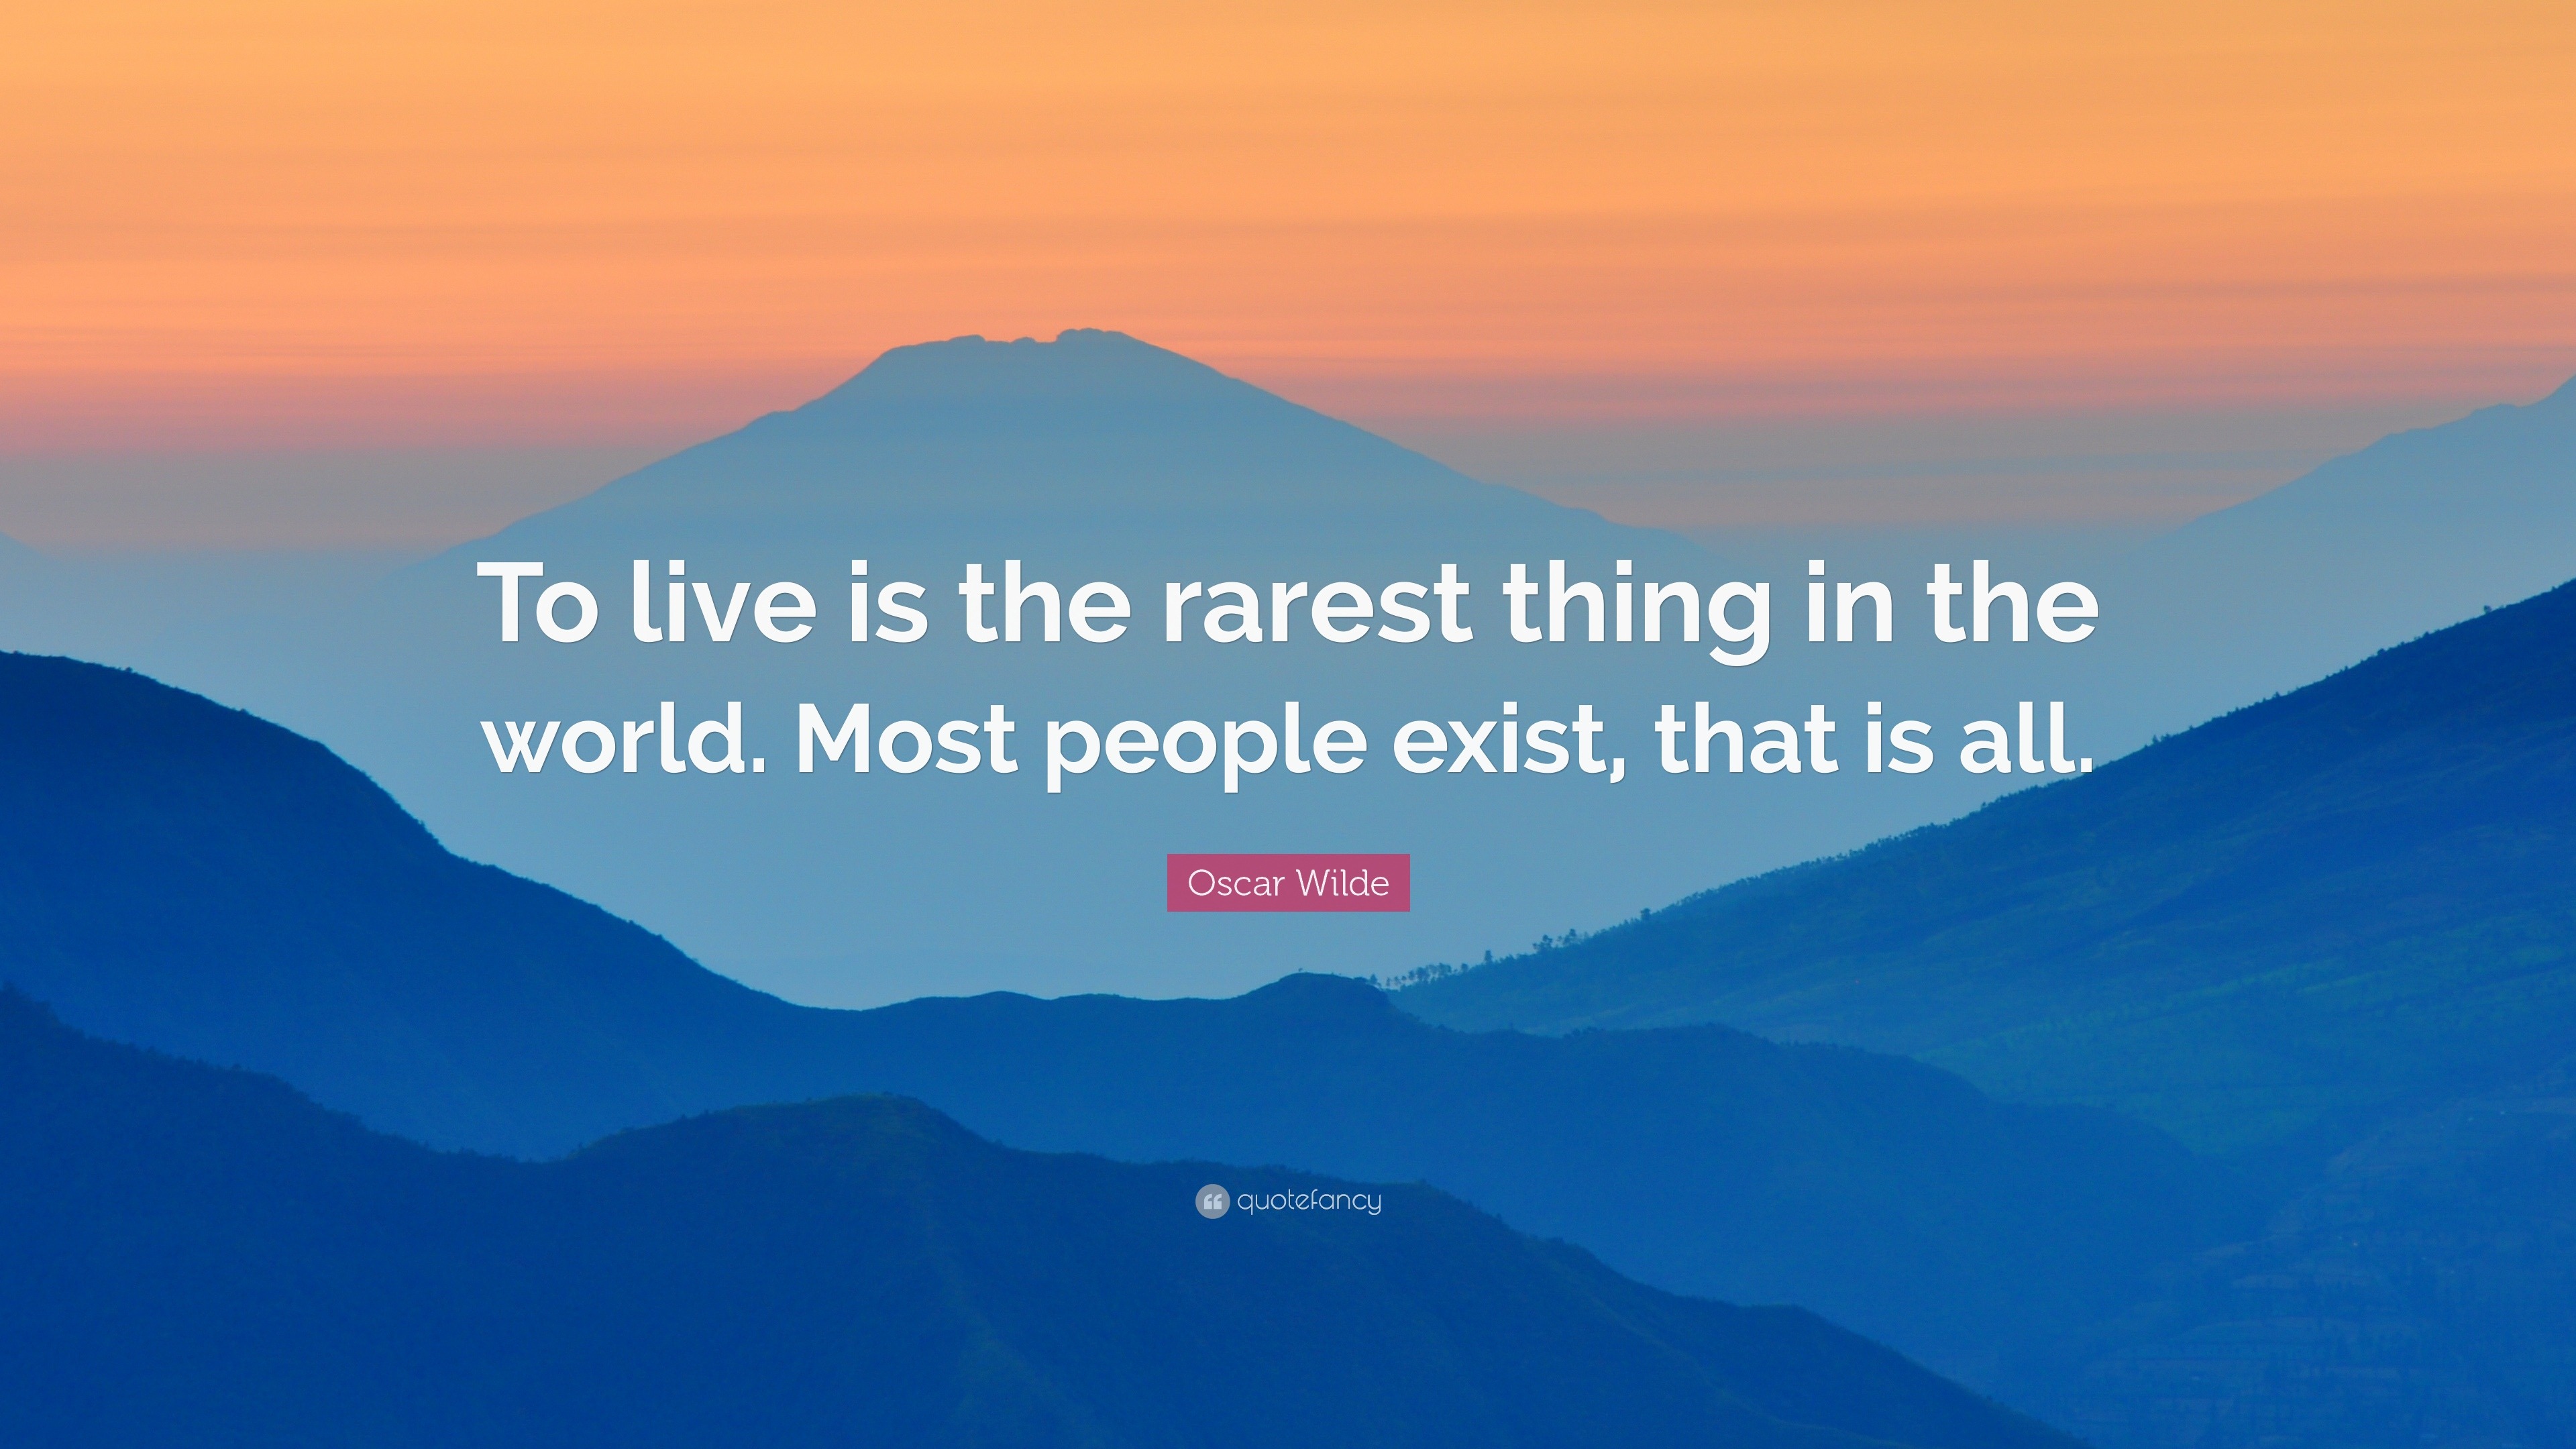 Oscar wilde to live is the rarest thing in the world meaning